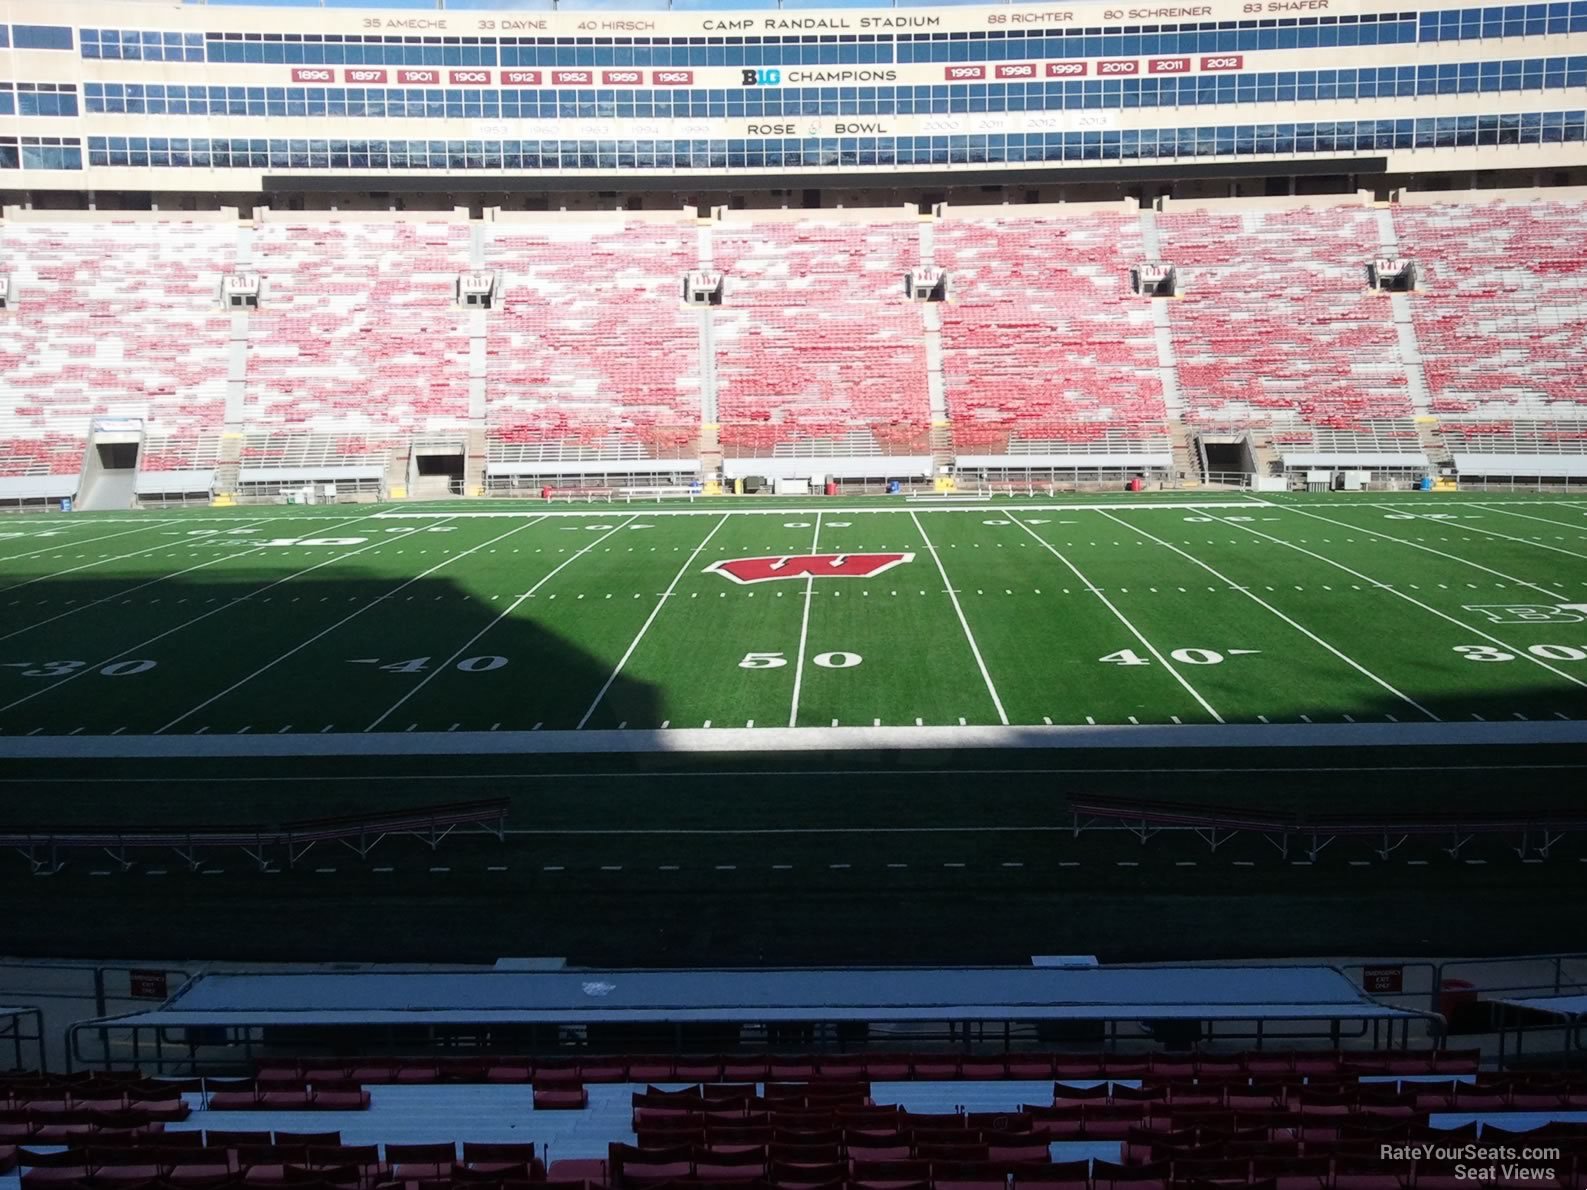 section e, row 30 seat view  - camp randall stadium